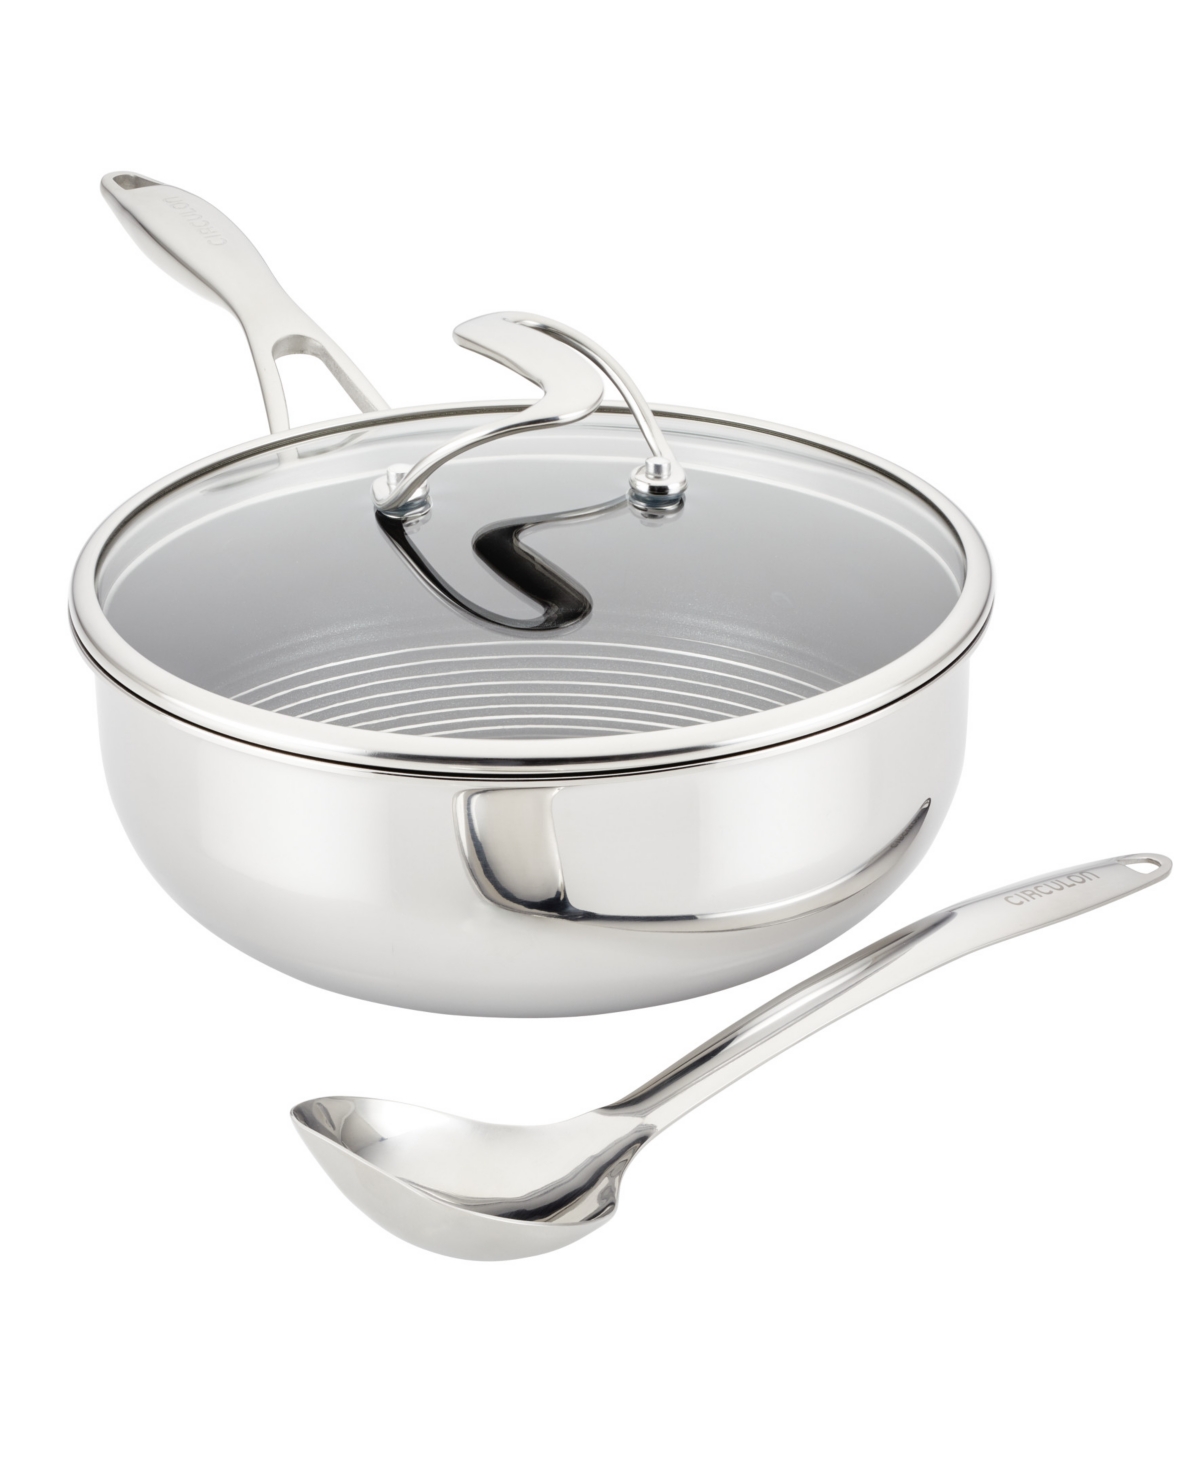 Circulon SteelShield C-Series Tri-Ply Clad Nonstick Chef Pan with Lid and Cooking Utensil Set, 3-Piece, Silver